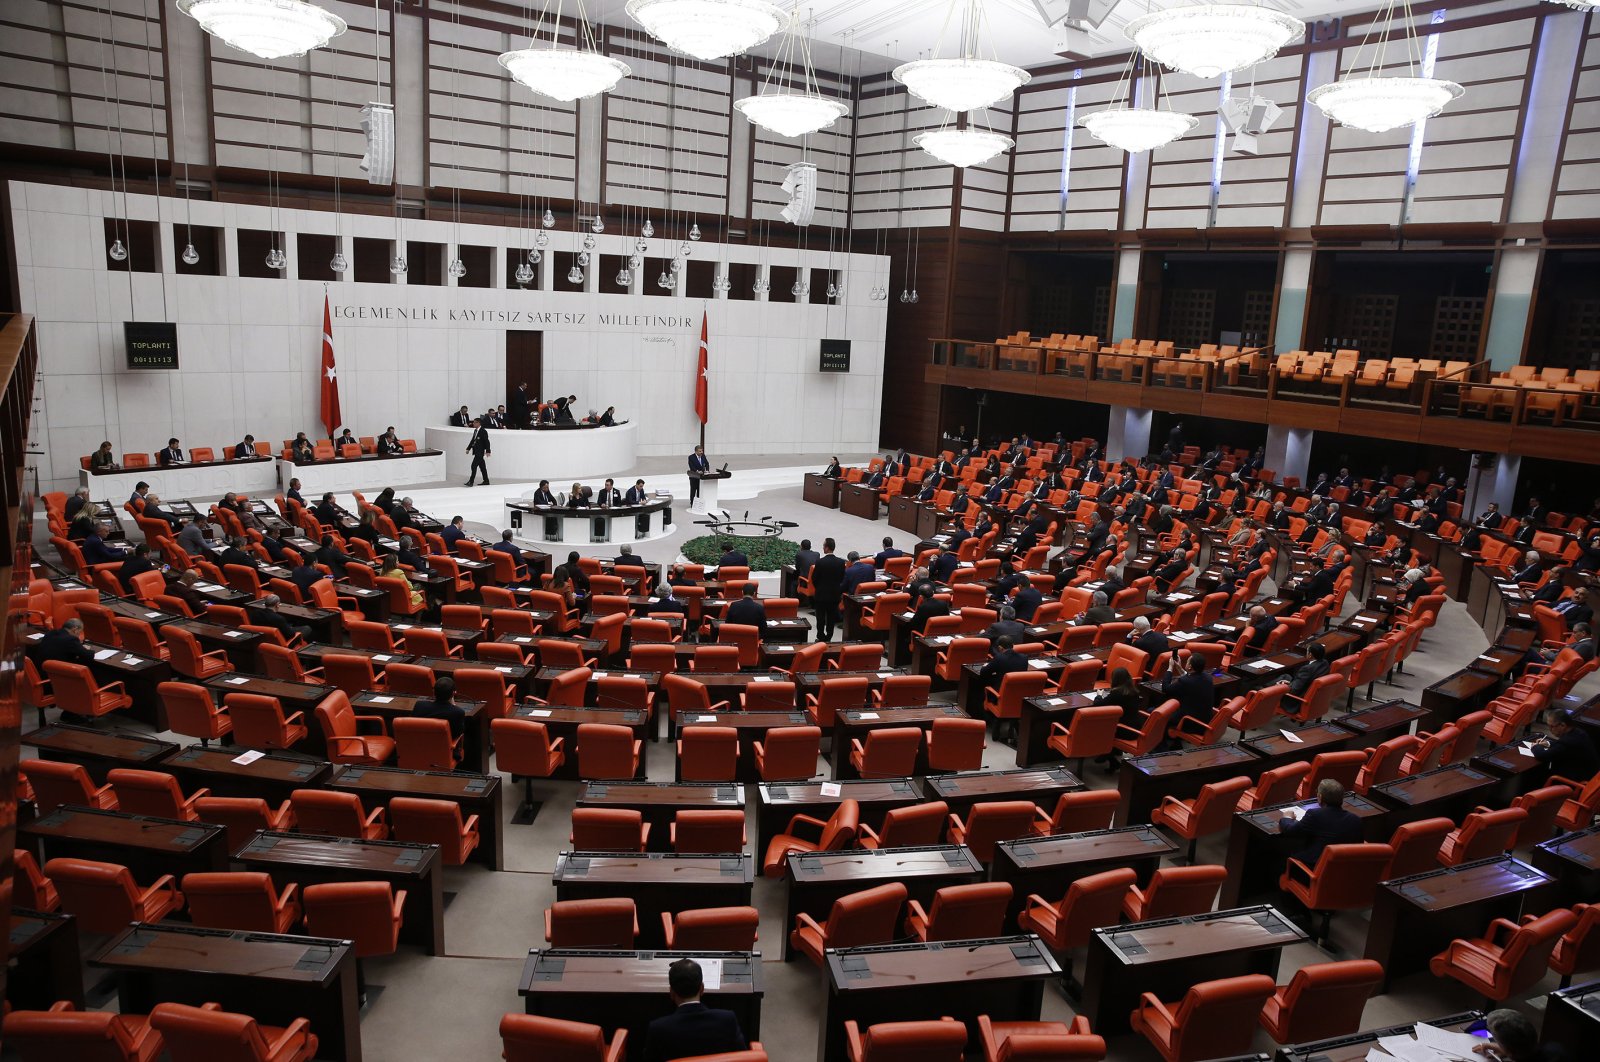 [June 1] Parliaments begin to resume sessions, prepare measures to tackle COVID-19